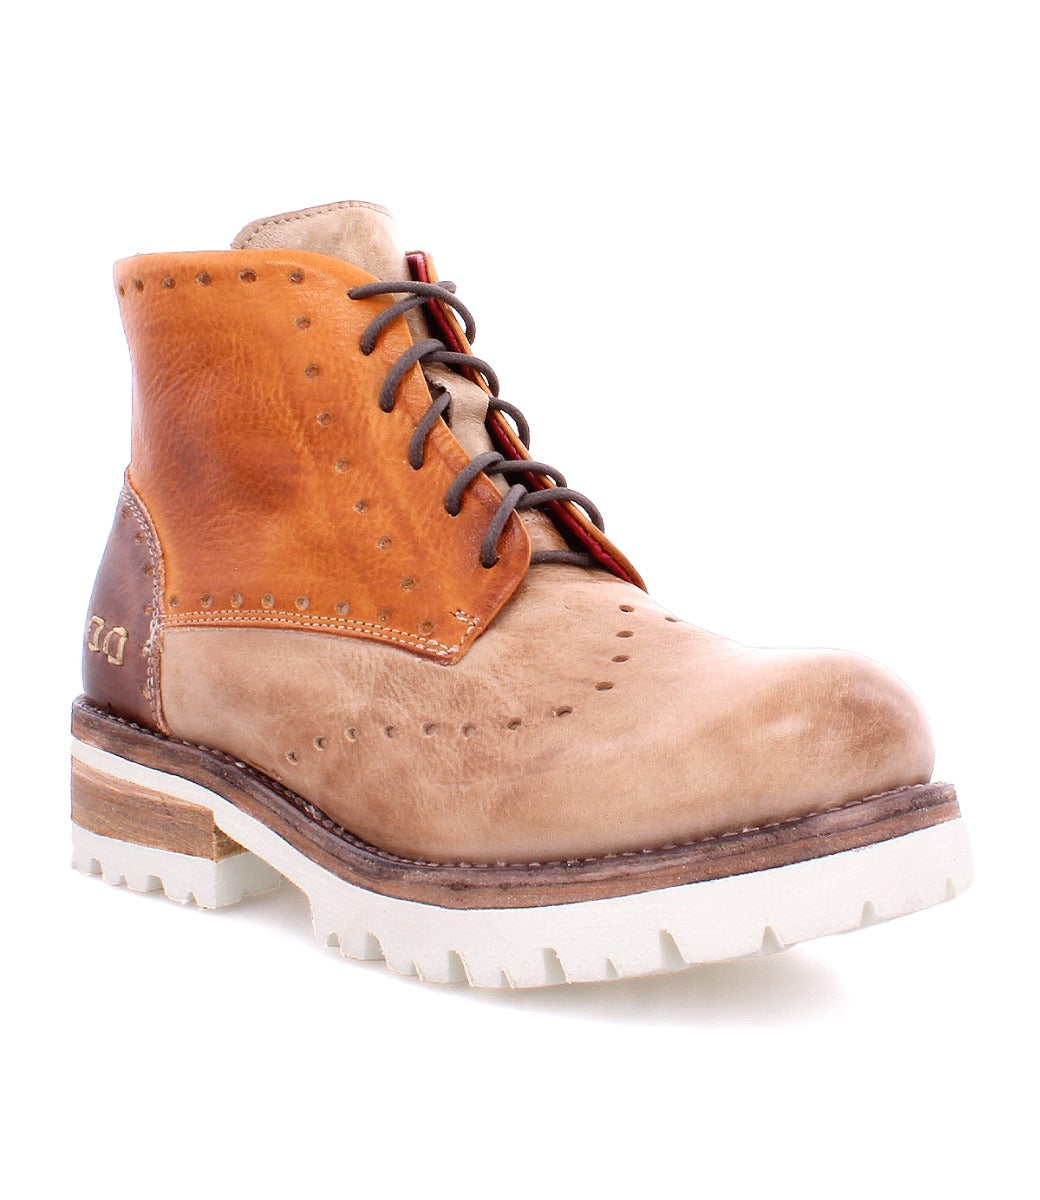 A pair of Bed Stu Quatro III brown and tan boots with a white sole.